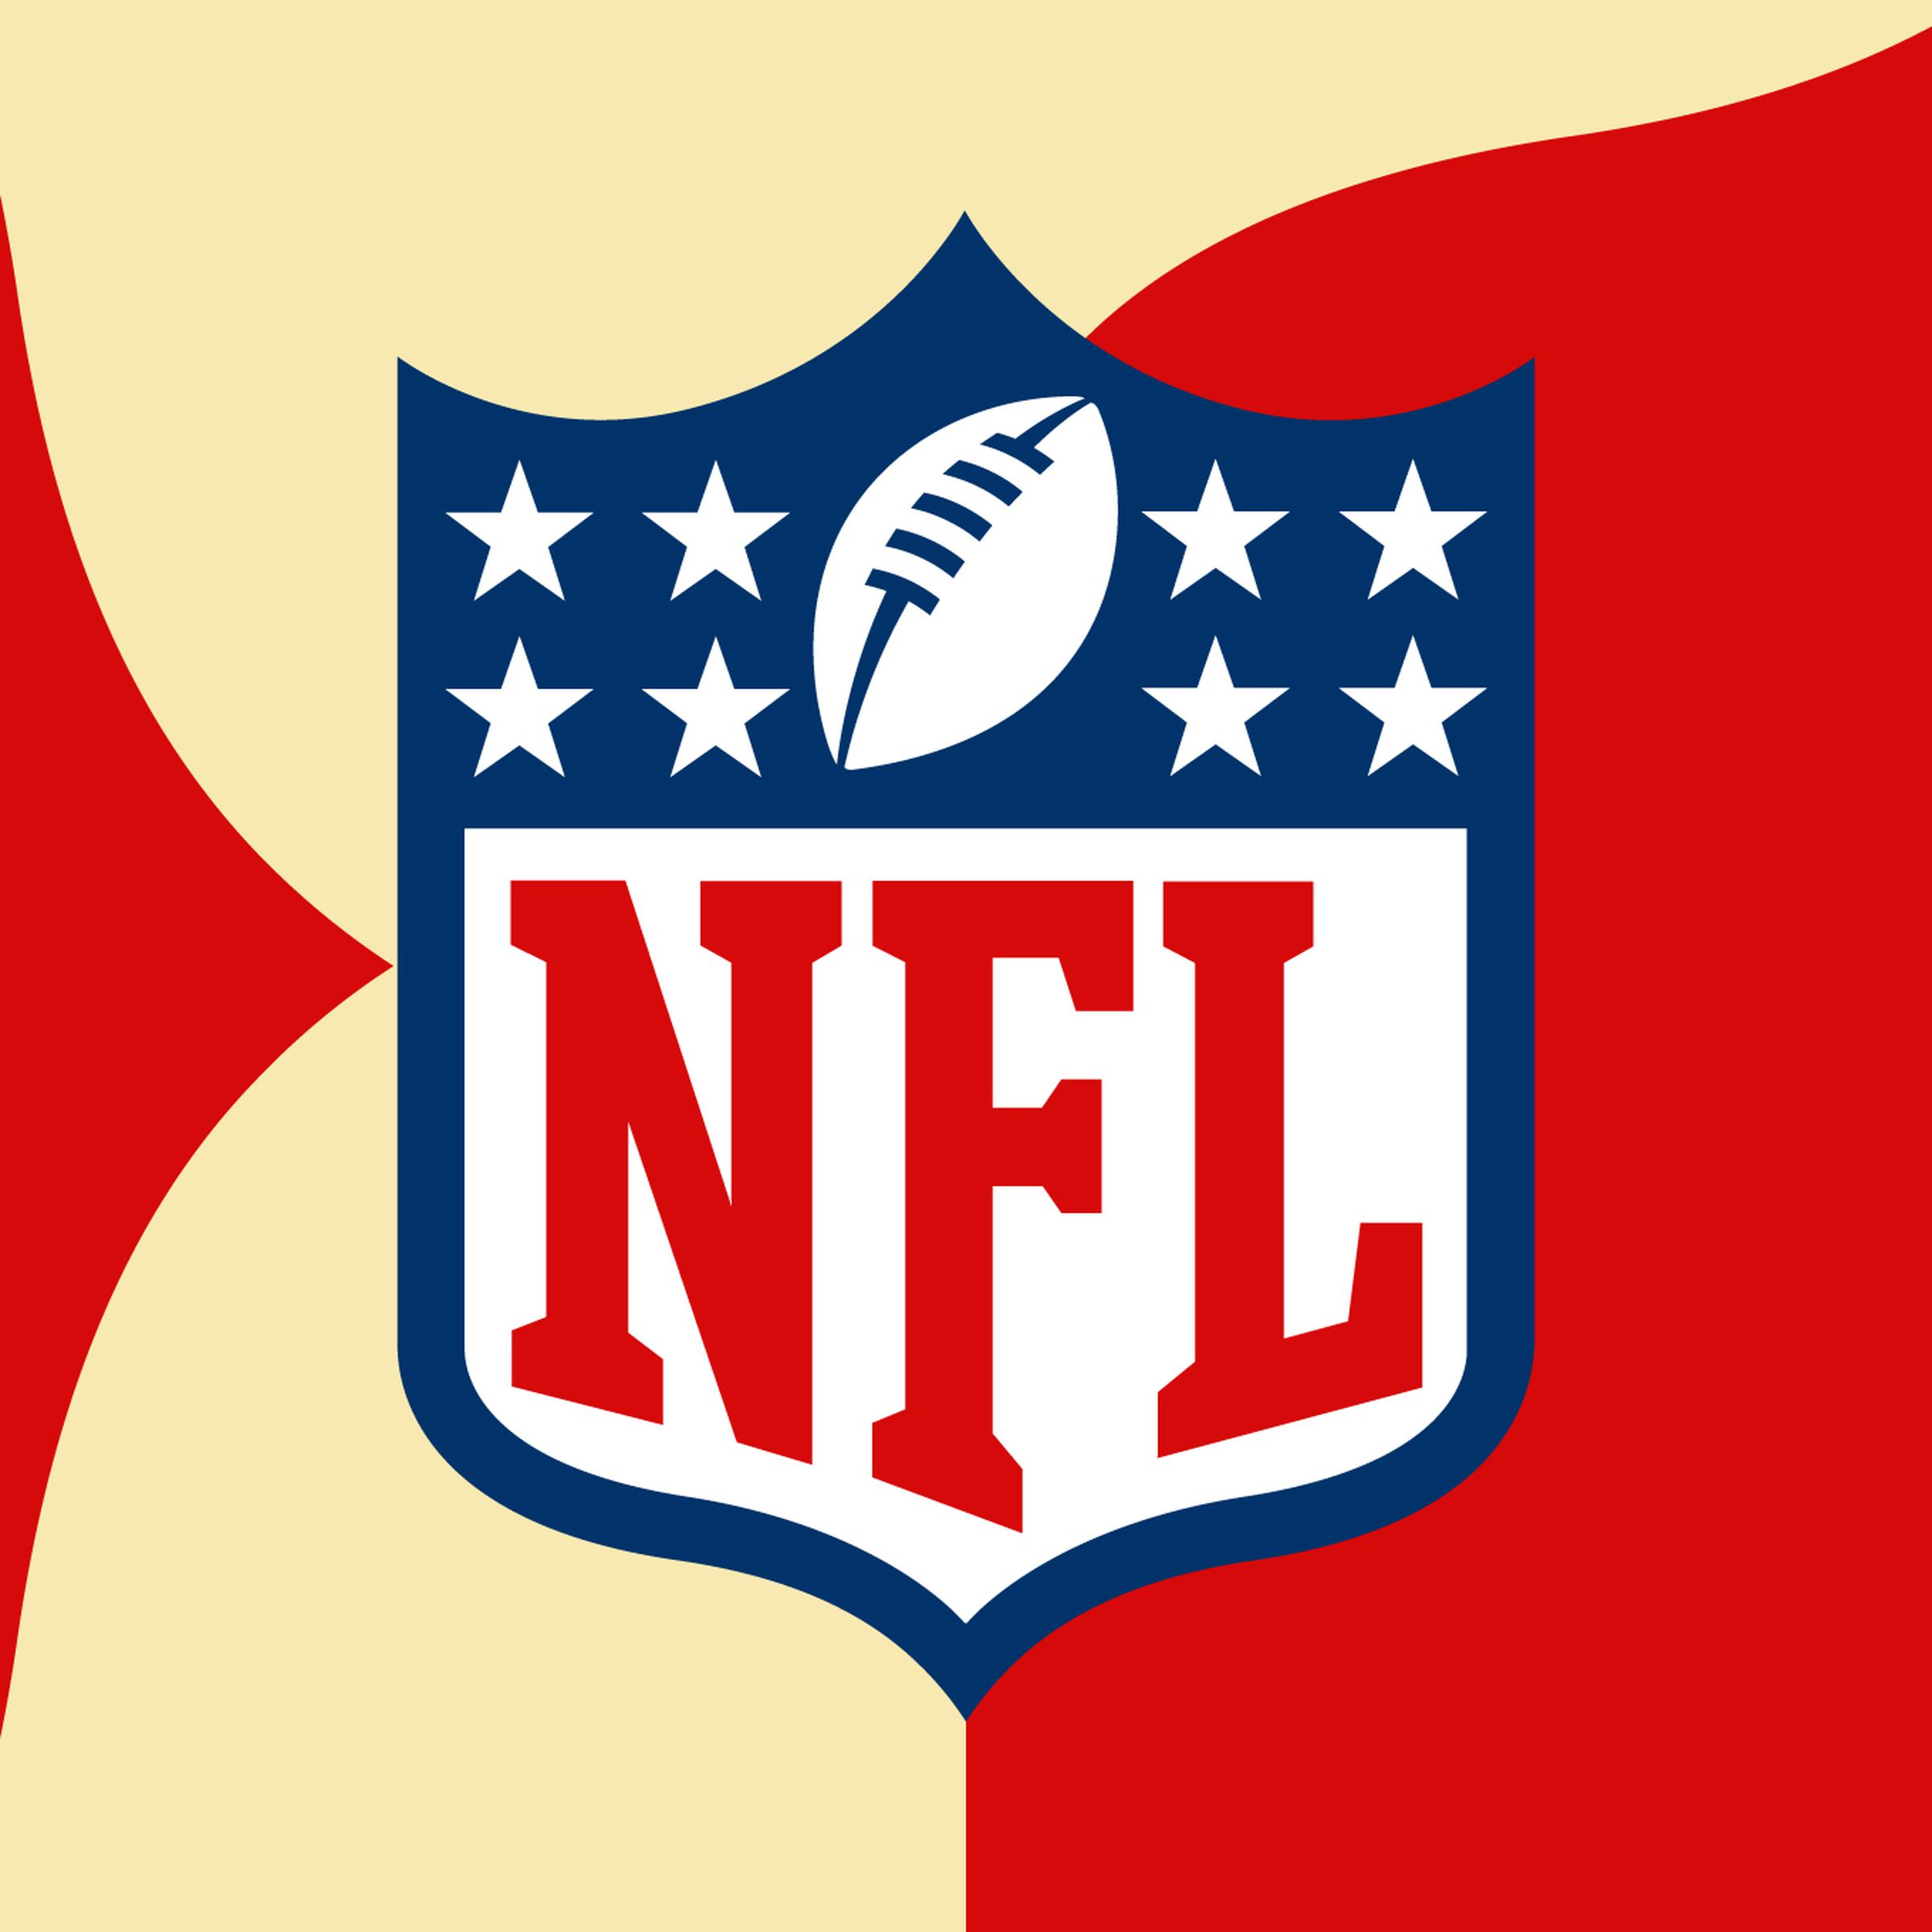 The NFL logo on a yellow and red background